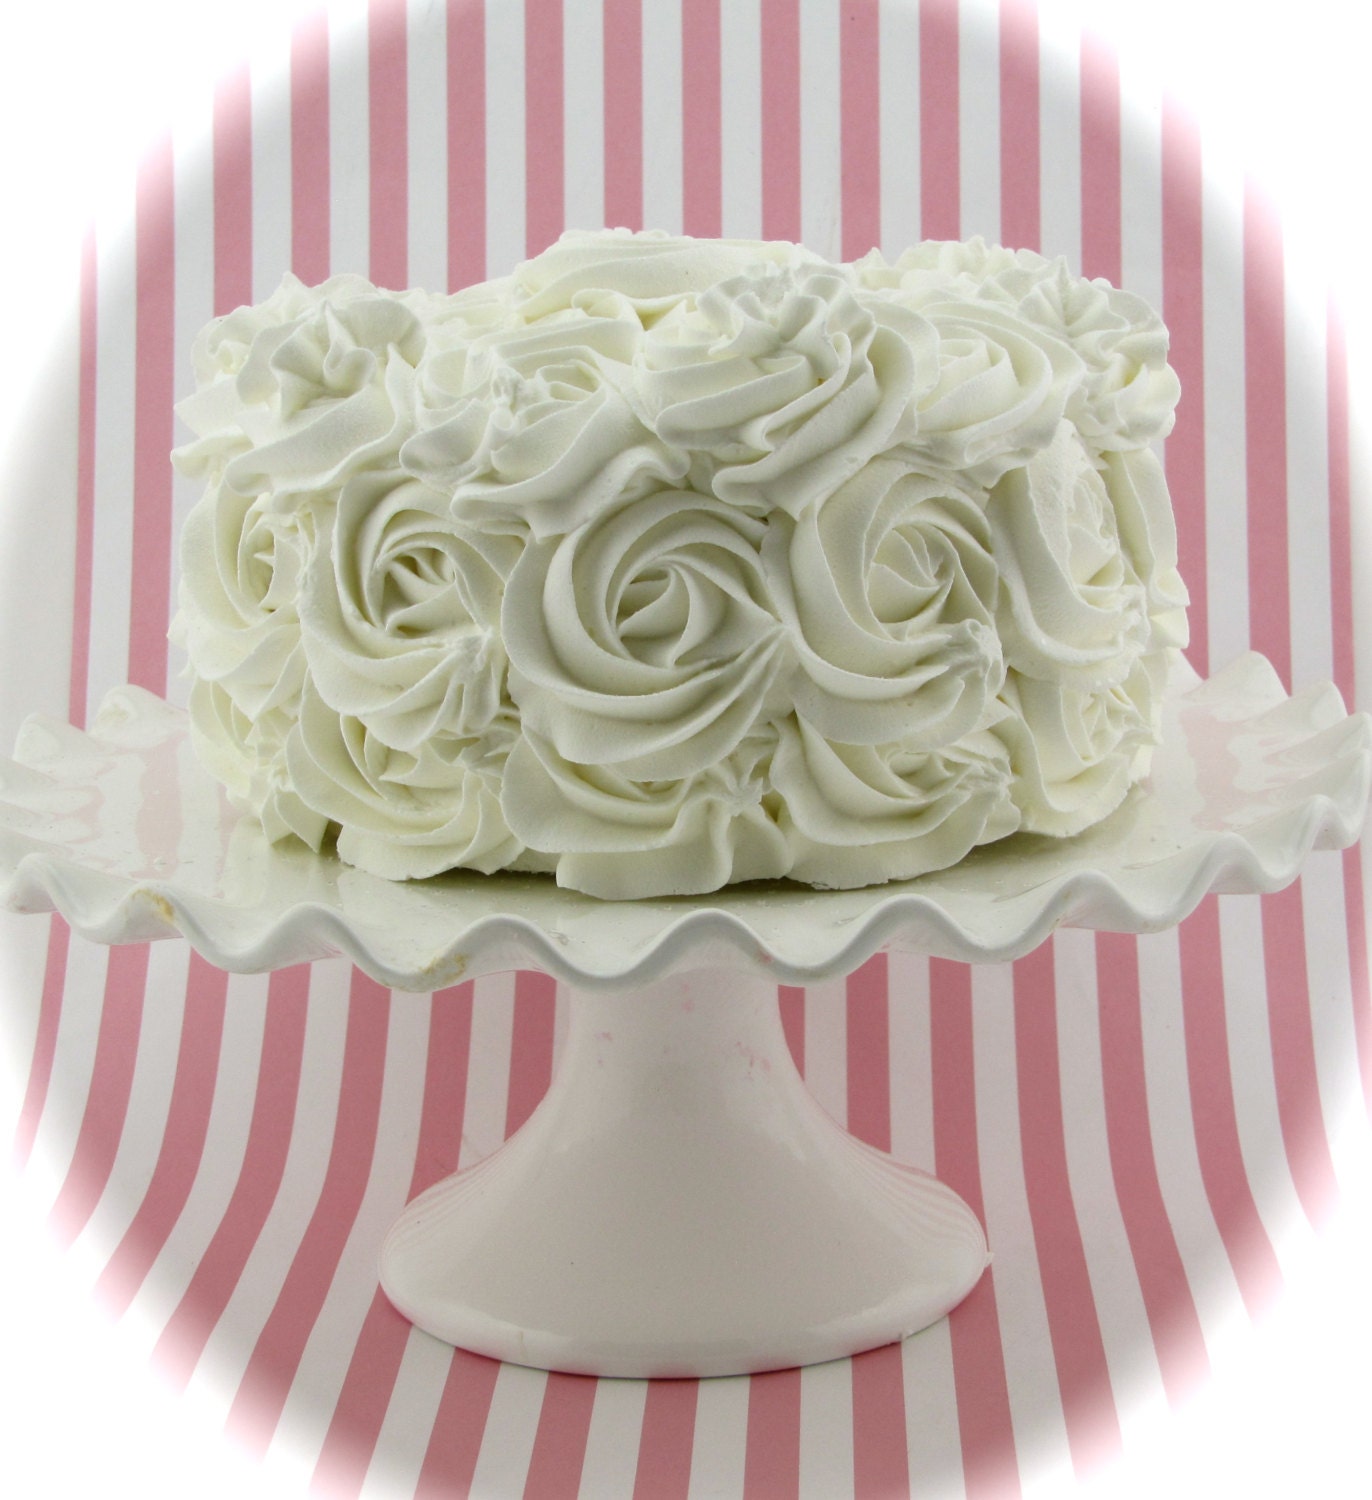 Blank Centred Rosettes 2 Tier Any Colour Price Is For 1 Rosette Only! 